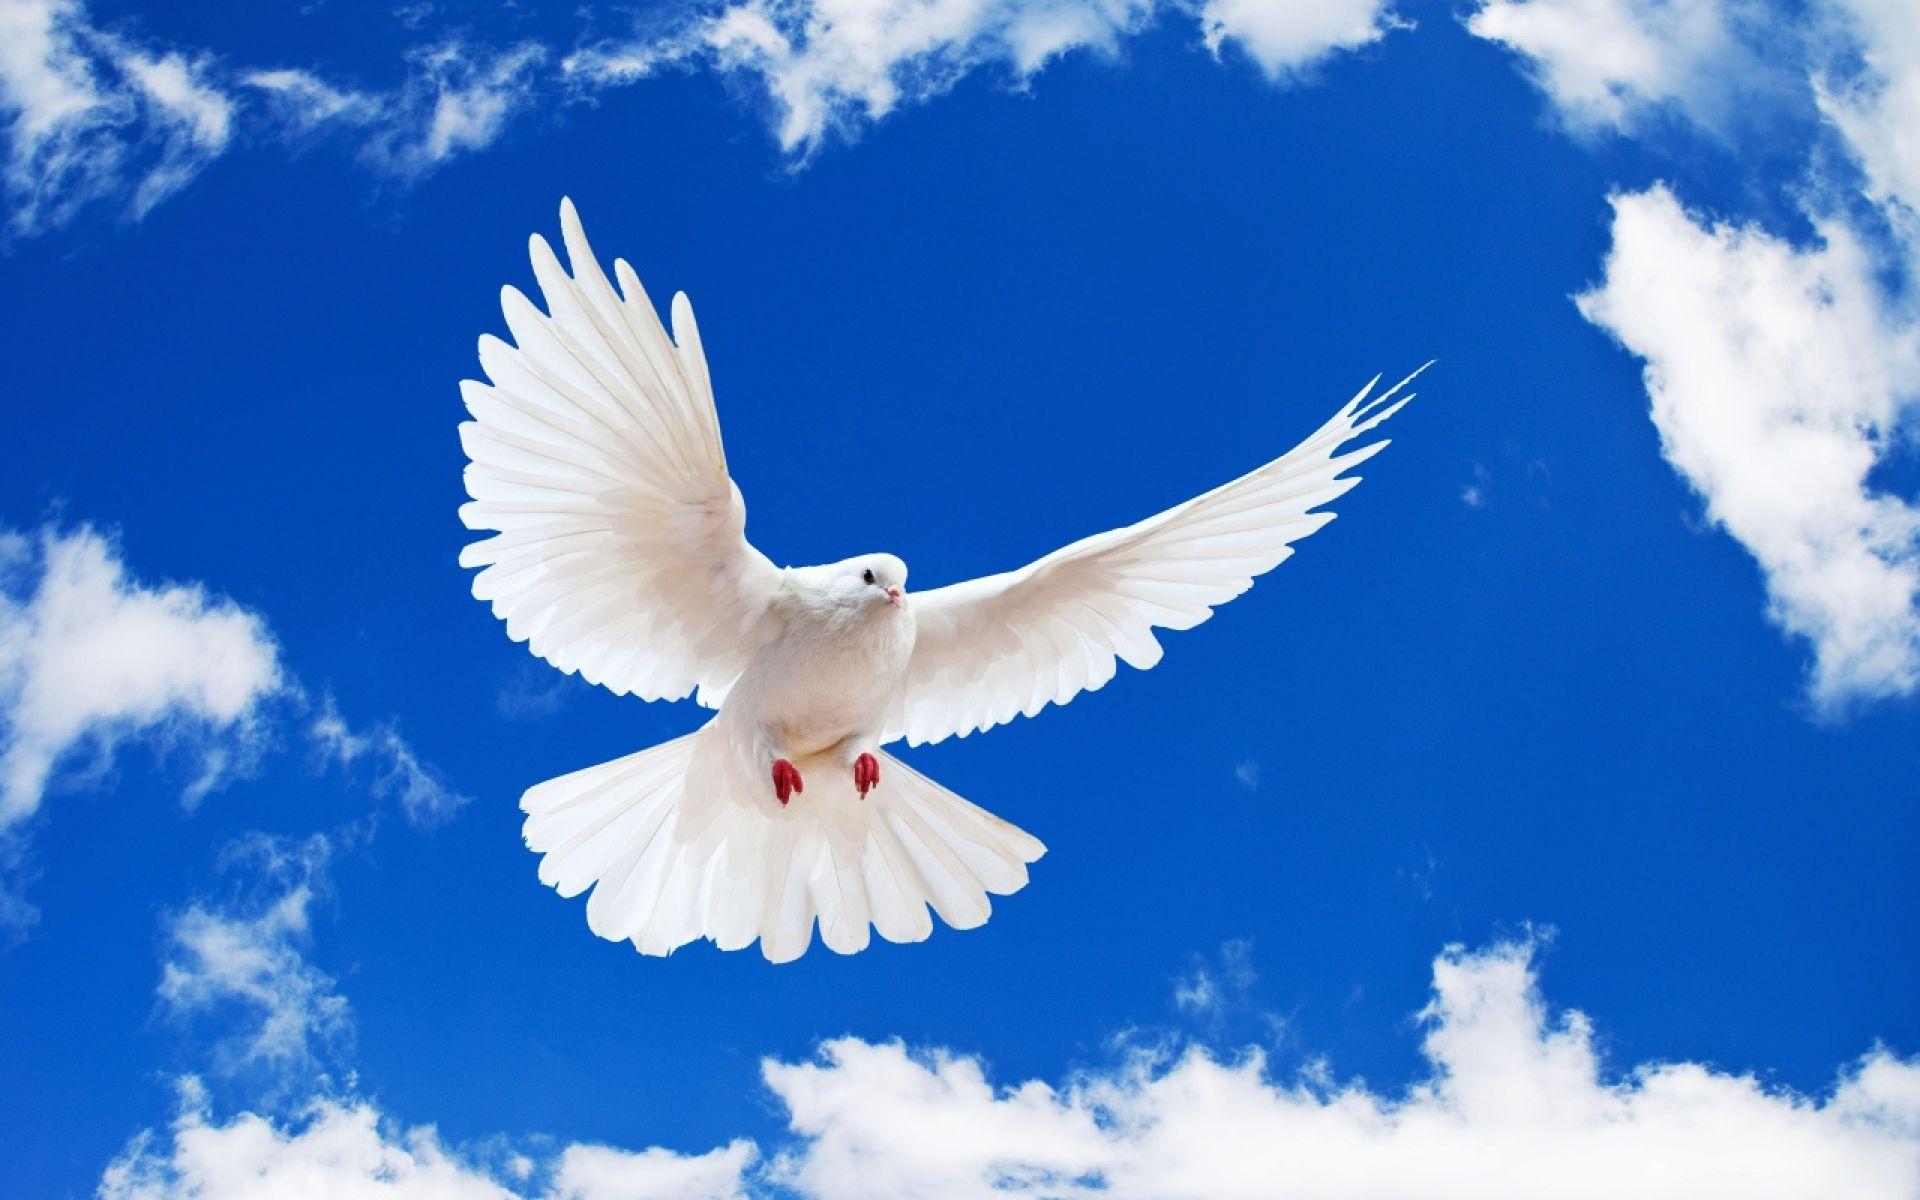 The Absolute Peace Symbol Pigeon Wallpaper. HD Animals and Birds